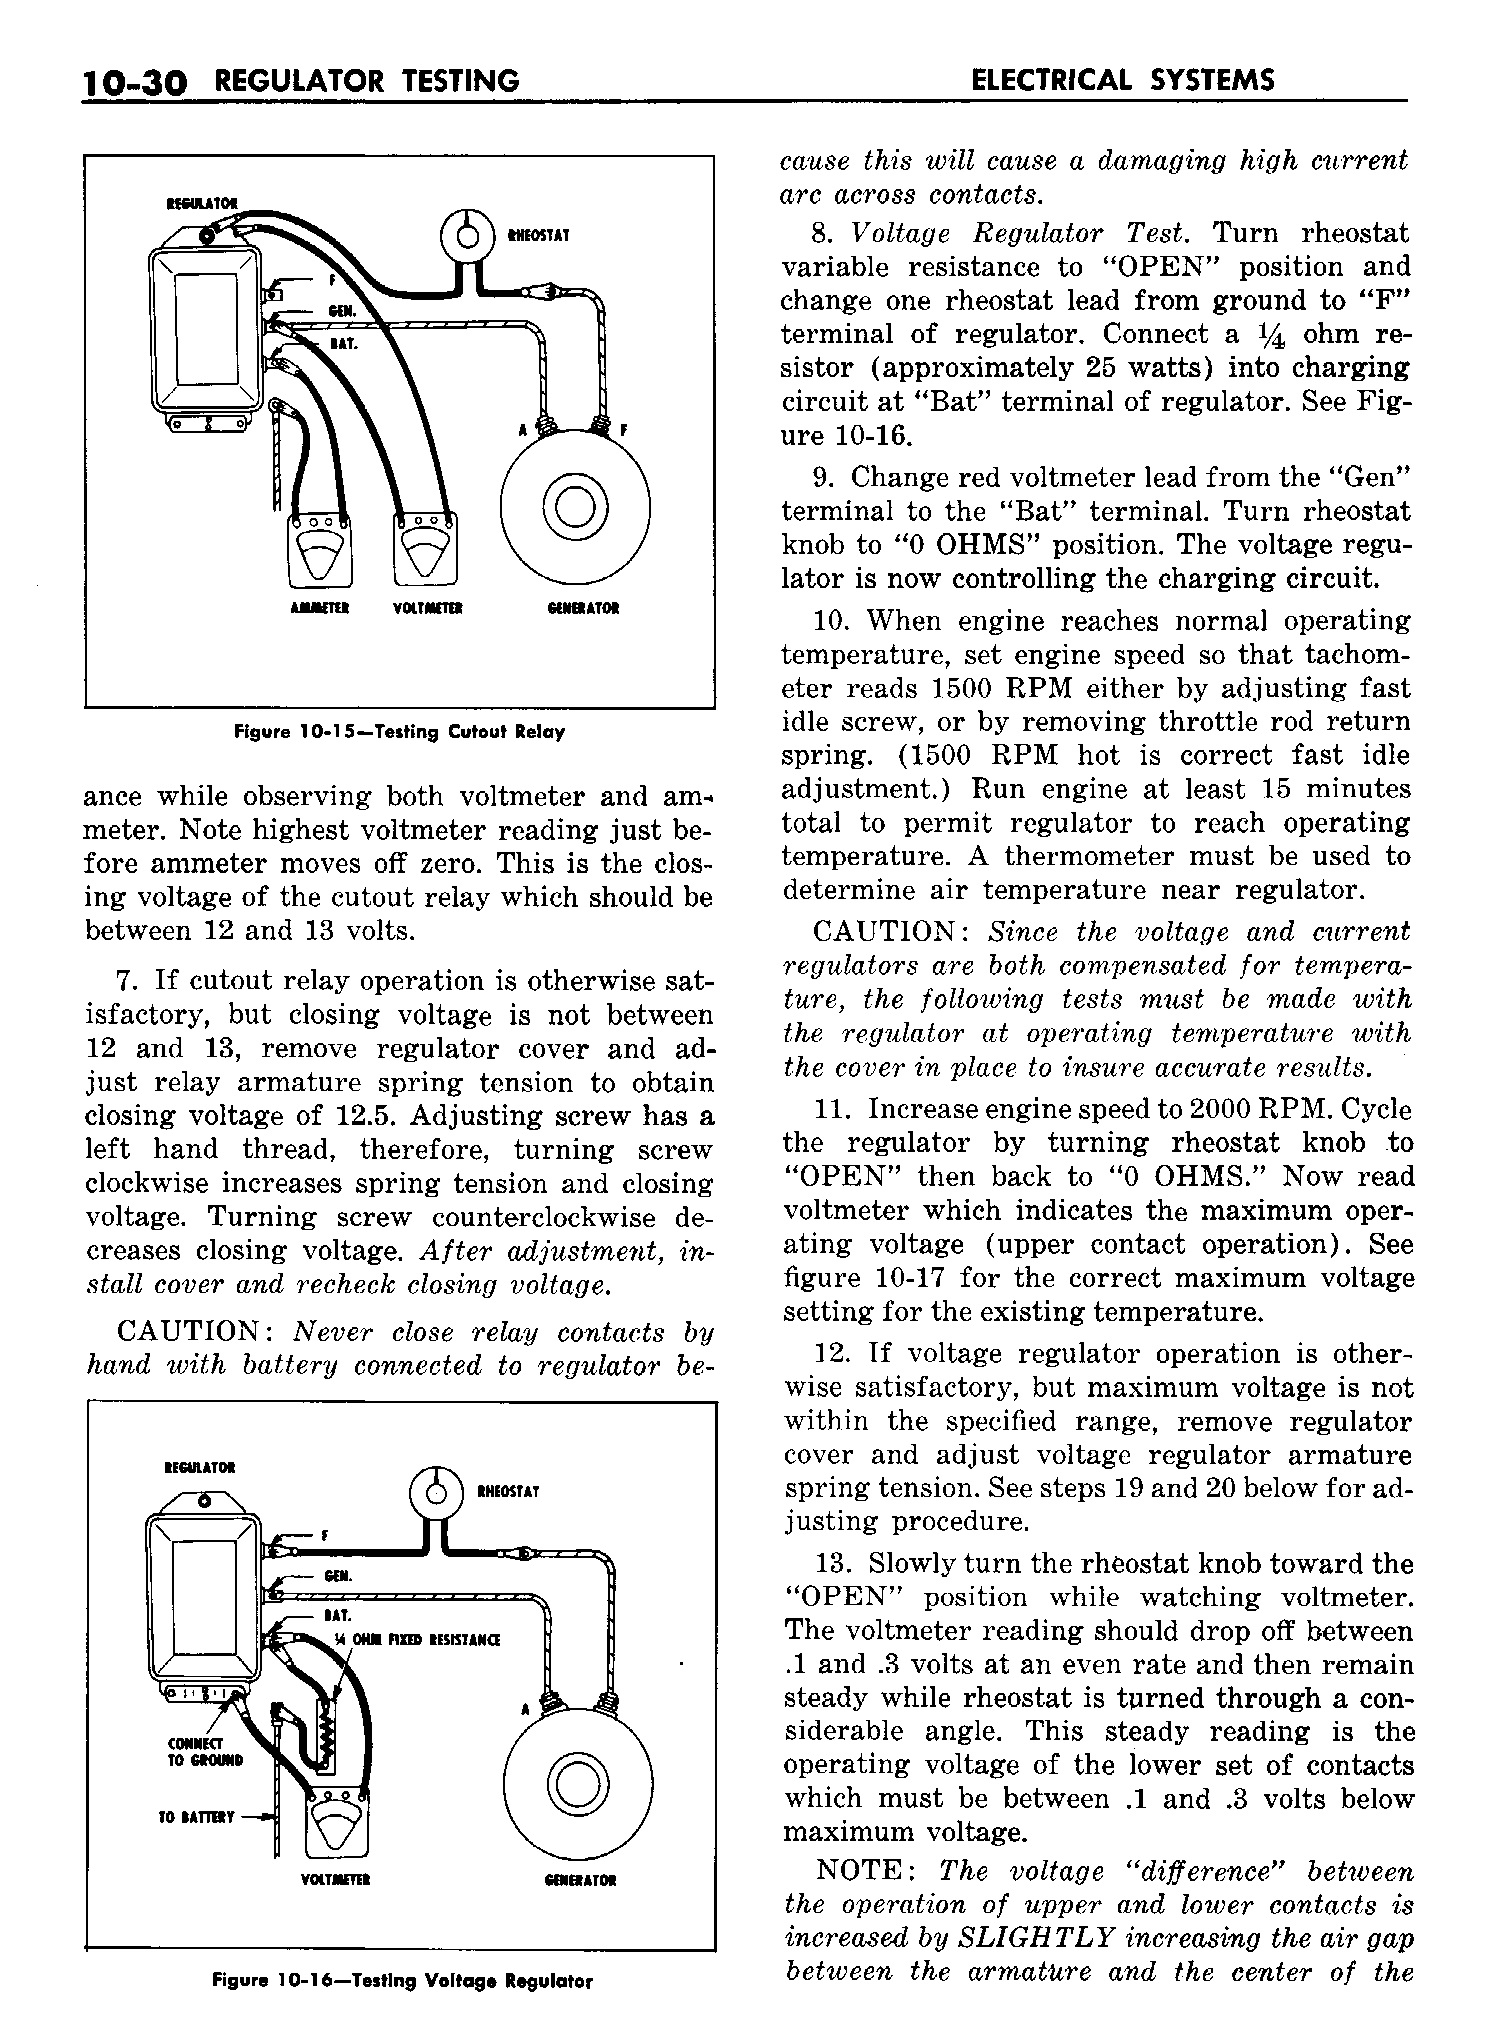 n_11 1958 Buick Shop Manual - Electrical Systems_30.jpg